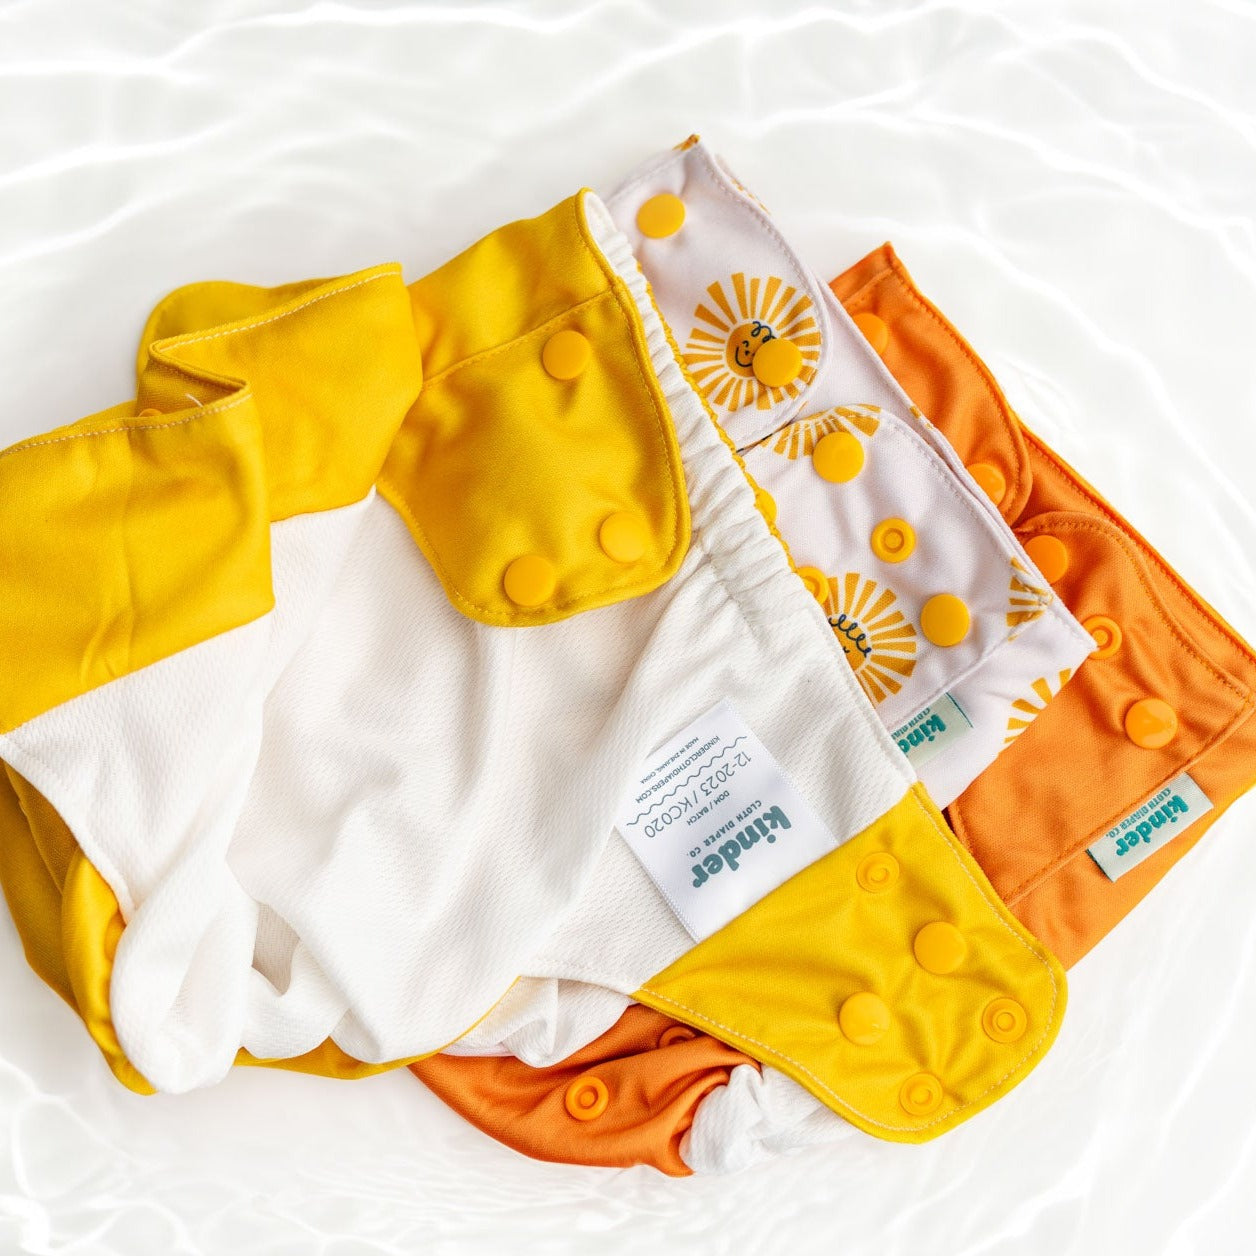 Set of 3 Reusable Swim Diapers with Athletic Wicking Jersey (7-60lbs)